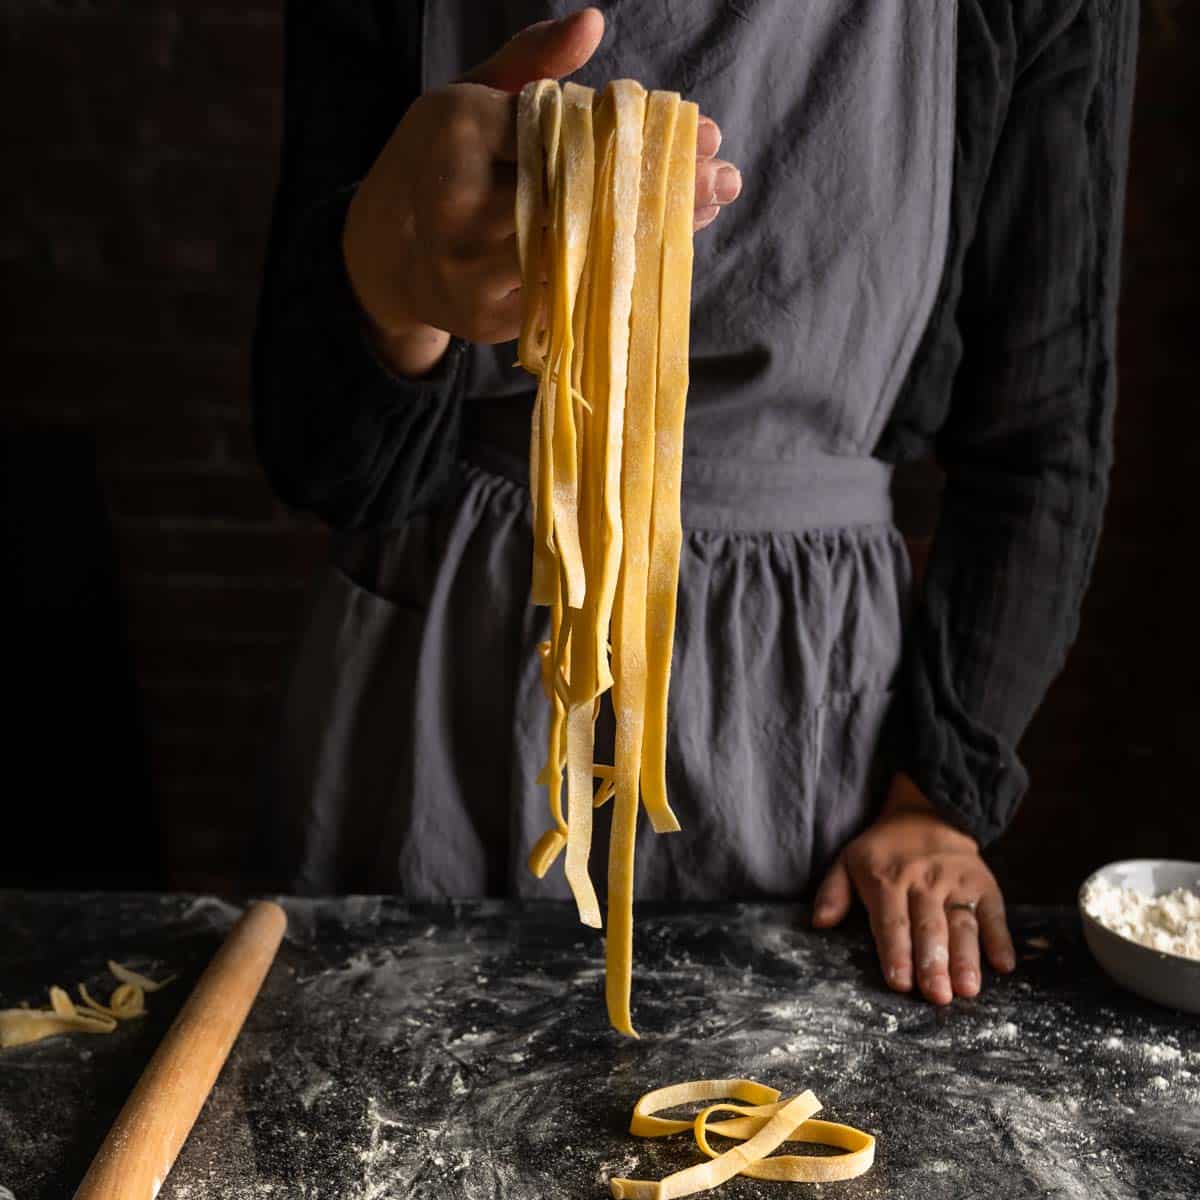 An aproned woman holding up a handful of homemade fettuccine pasta noodles